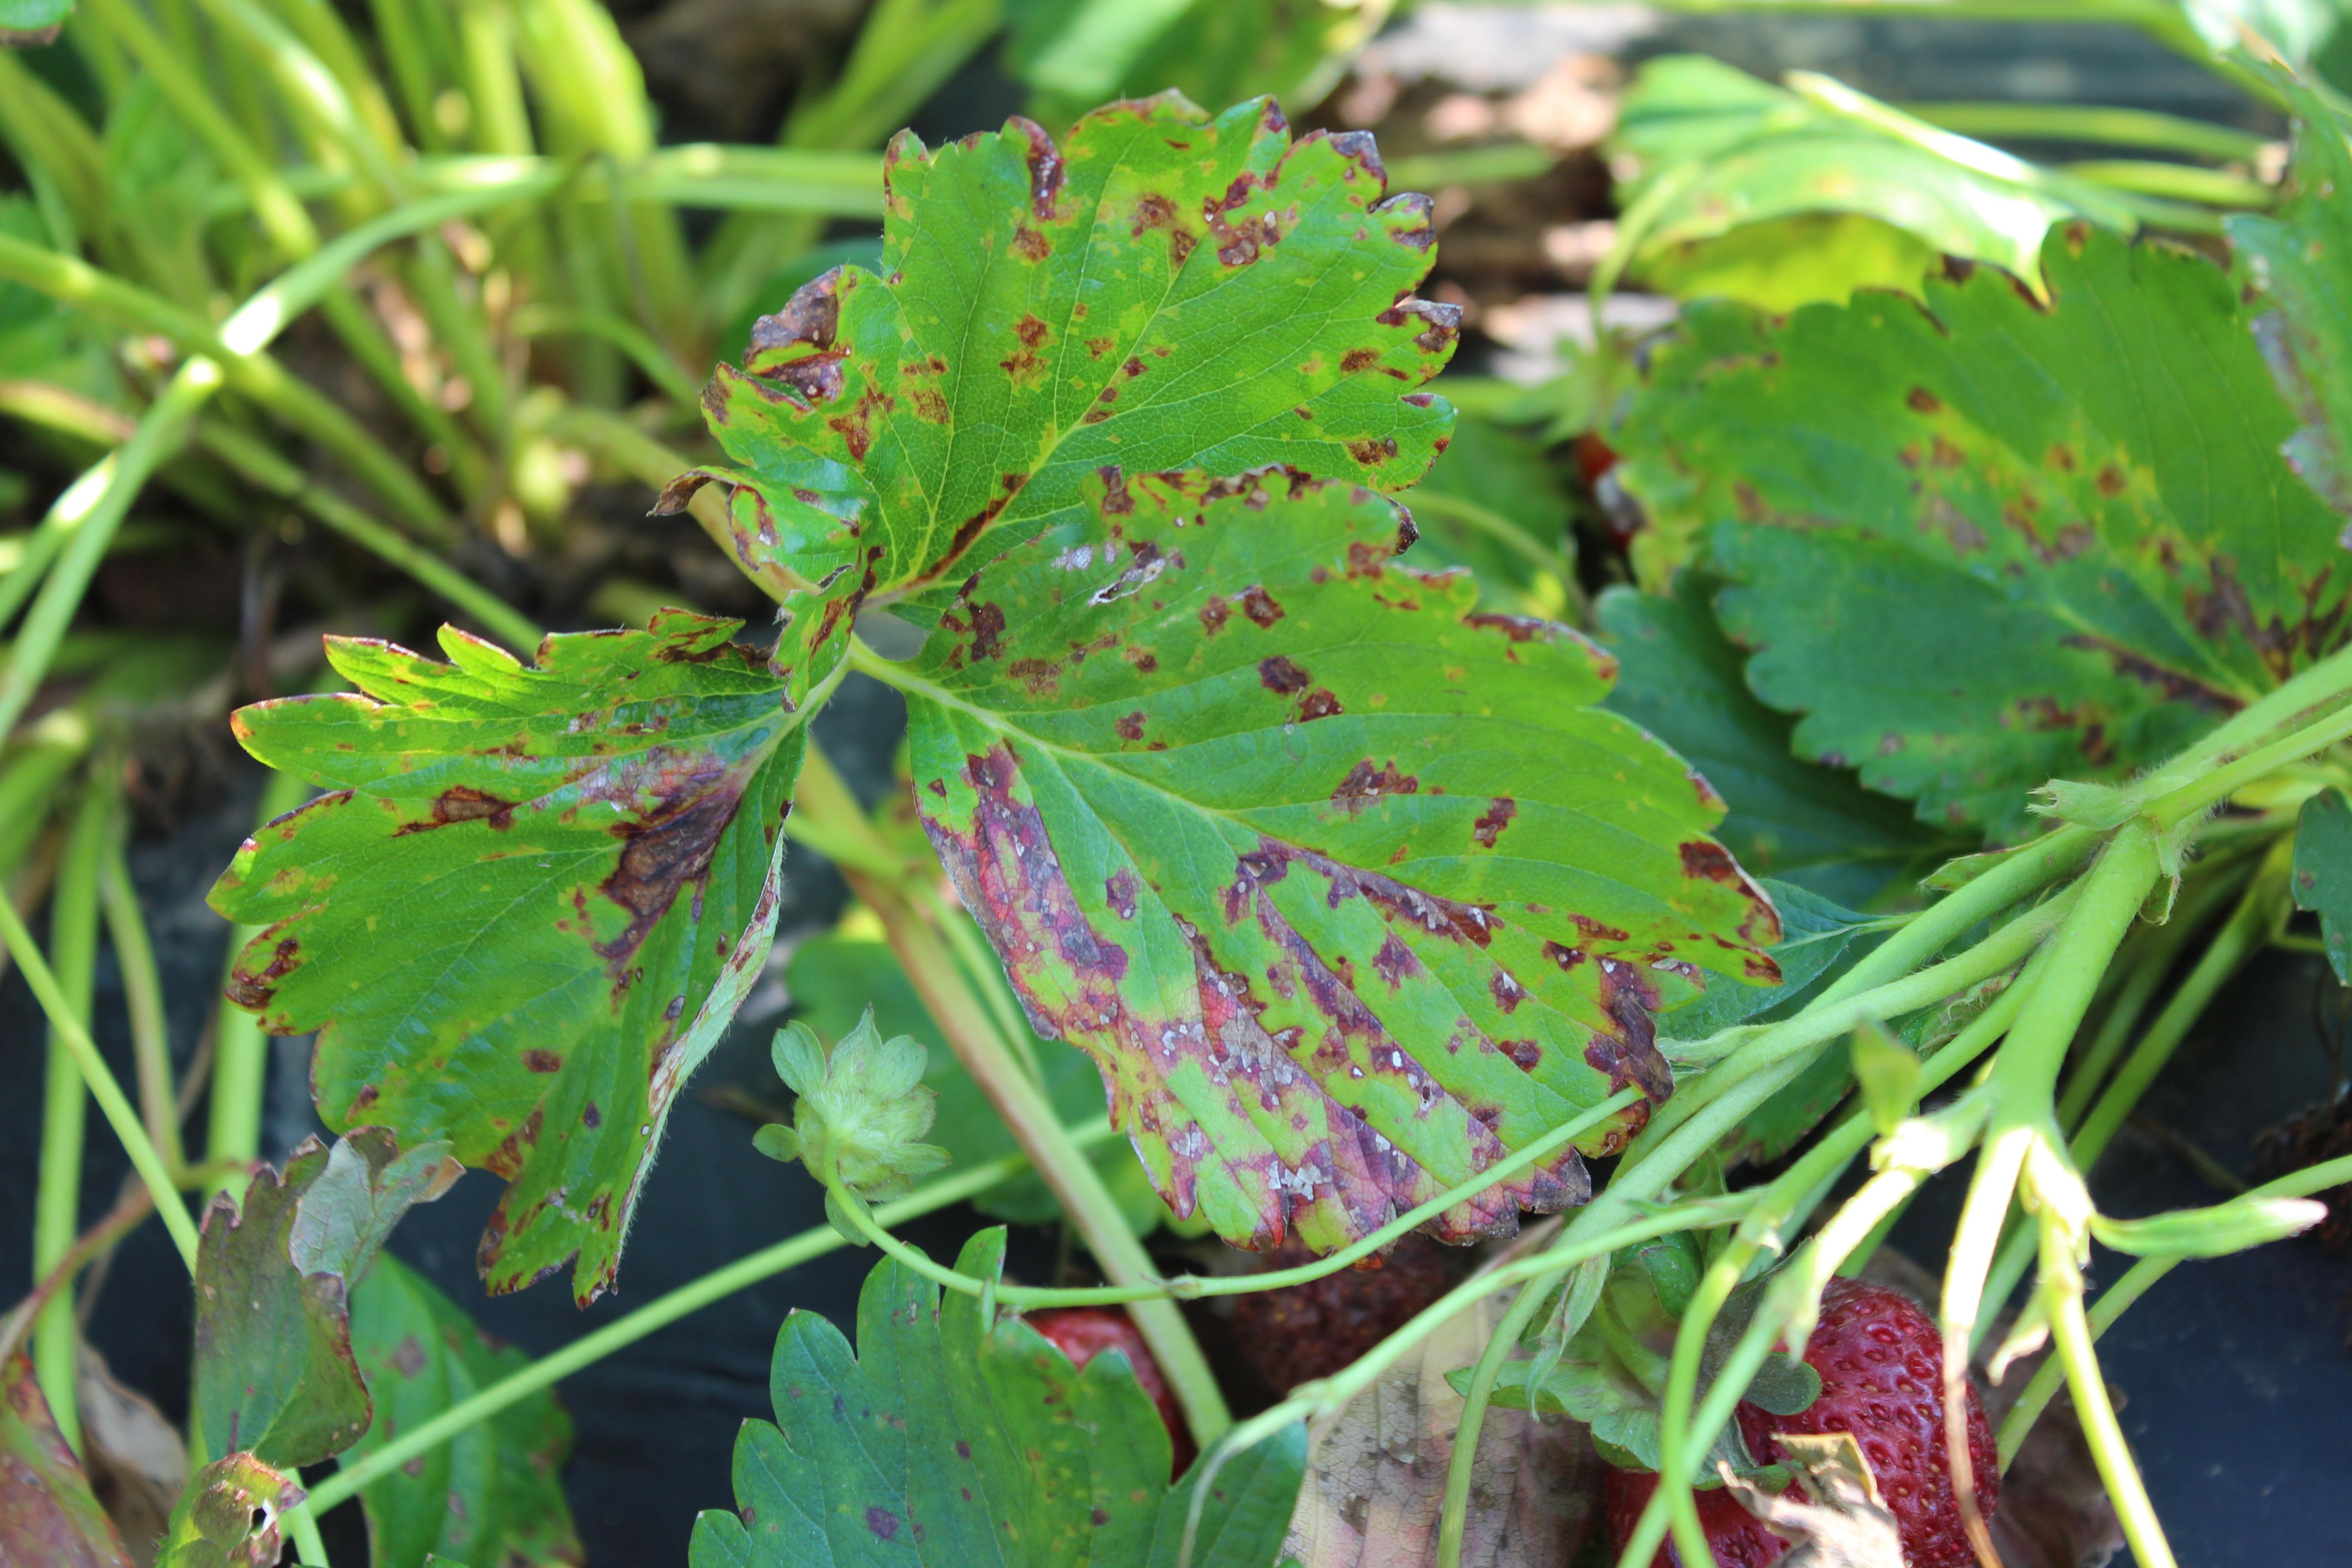 Angular leaf spot lesions later become necrotic (Gauthier, UKY)